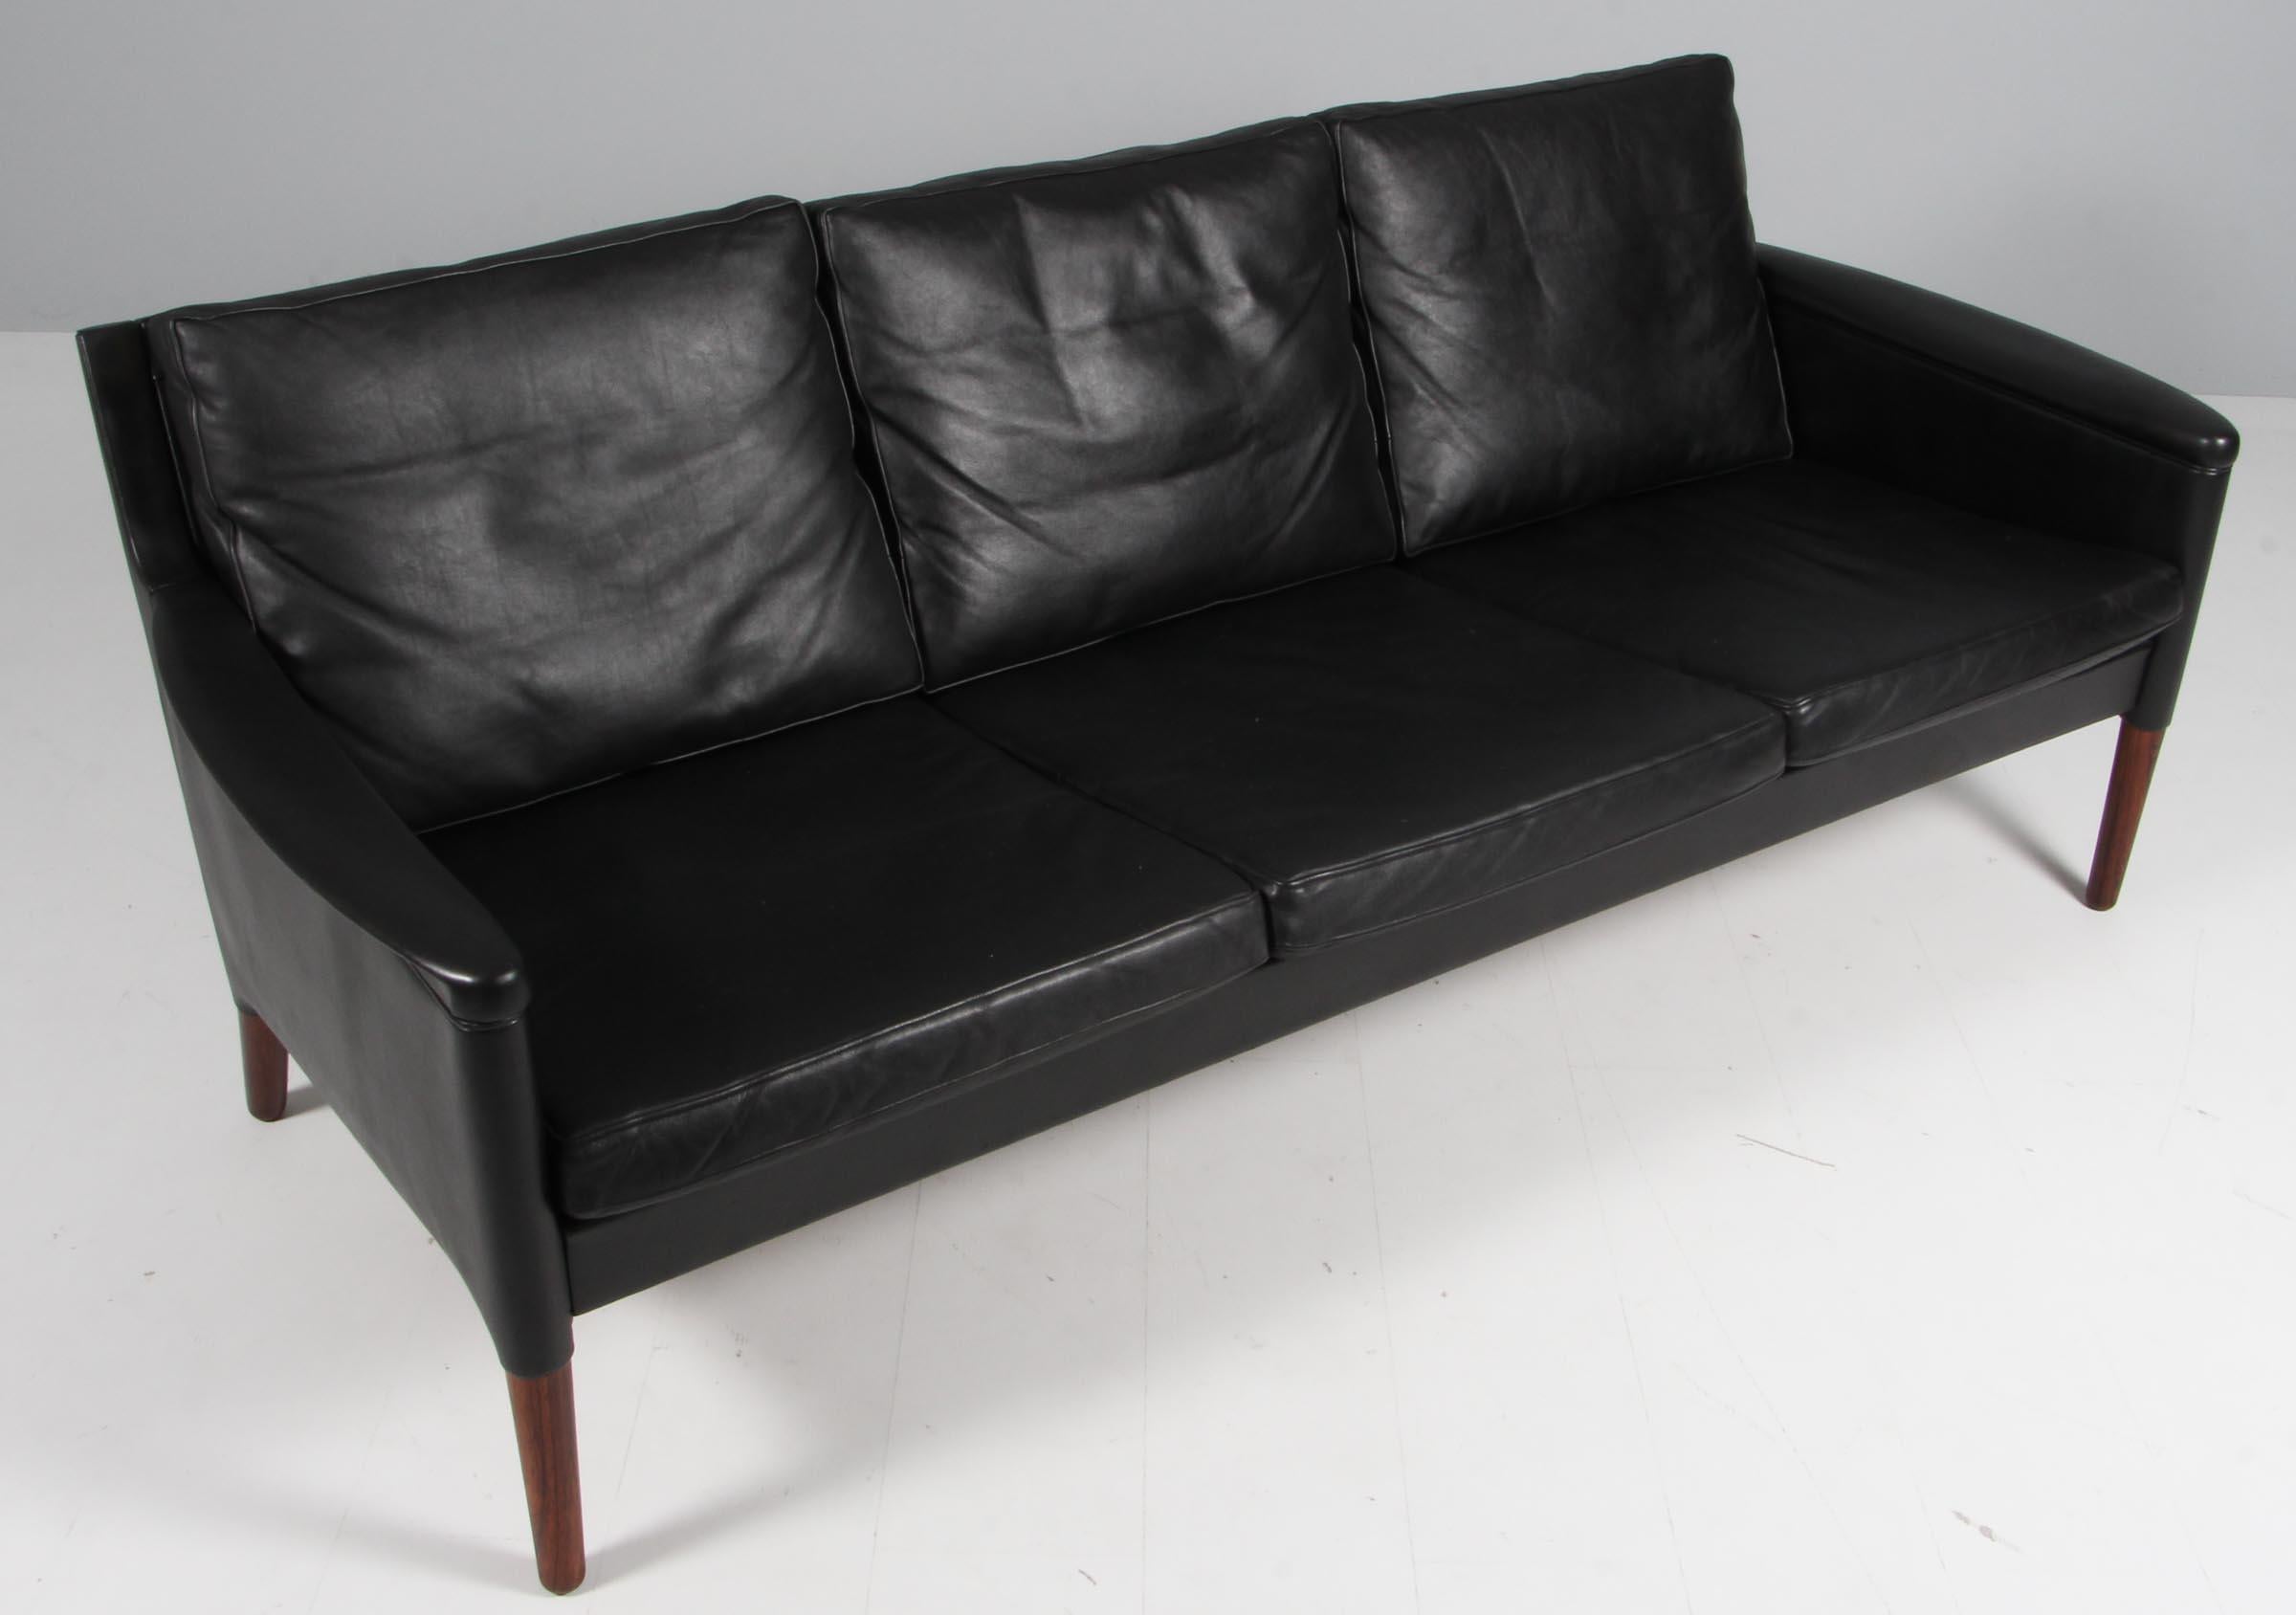 Kurt Østervig three seater sofa in original black leather.

Legs of rosewood.

Made by Centrum Møbler in the 1960s